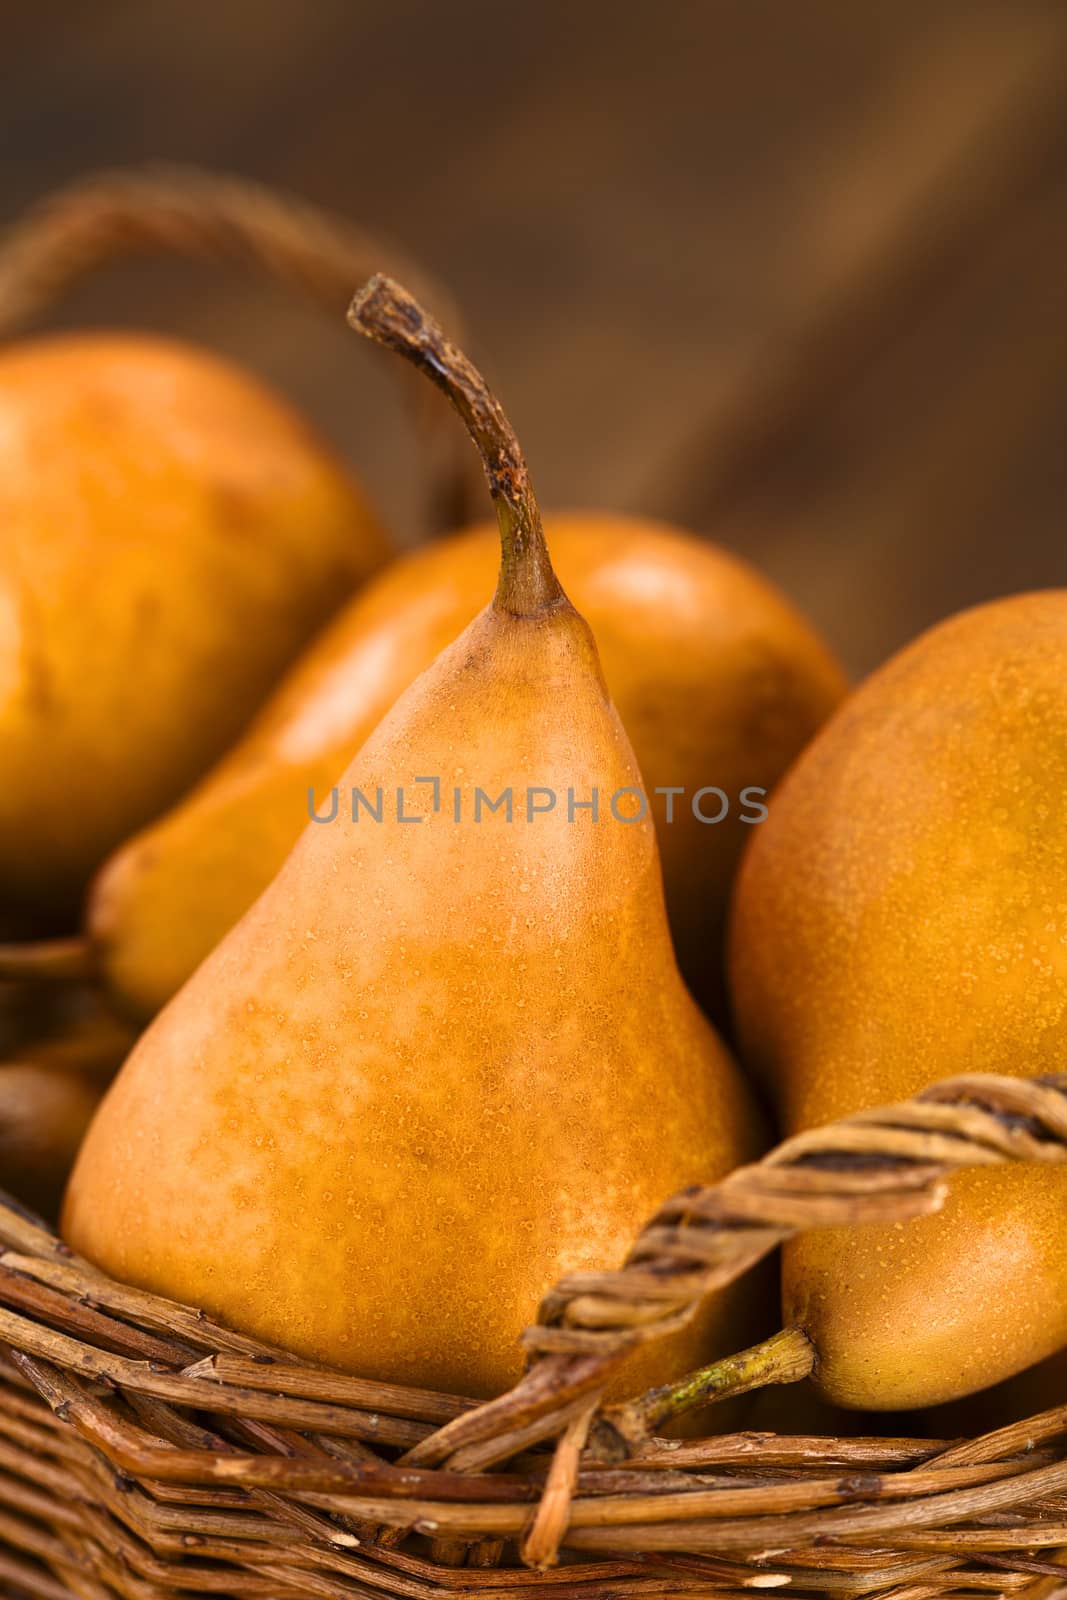 Ripe Bosc pears in Basket (Selective Focus, Focus on the front of the pear on the left)